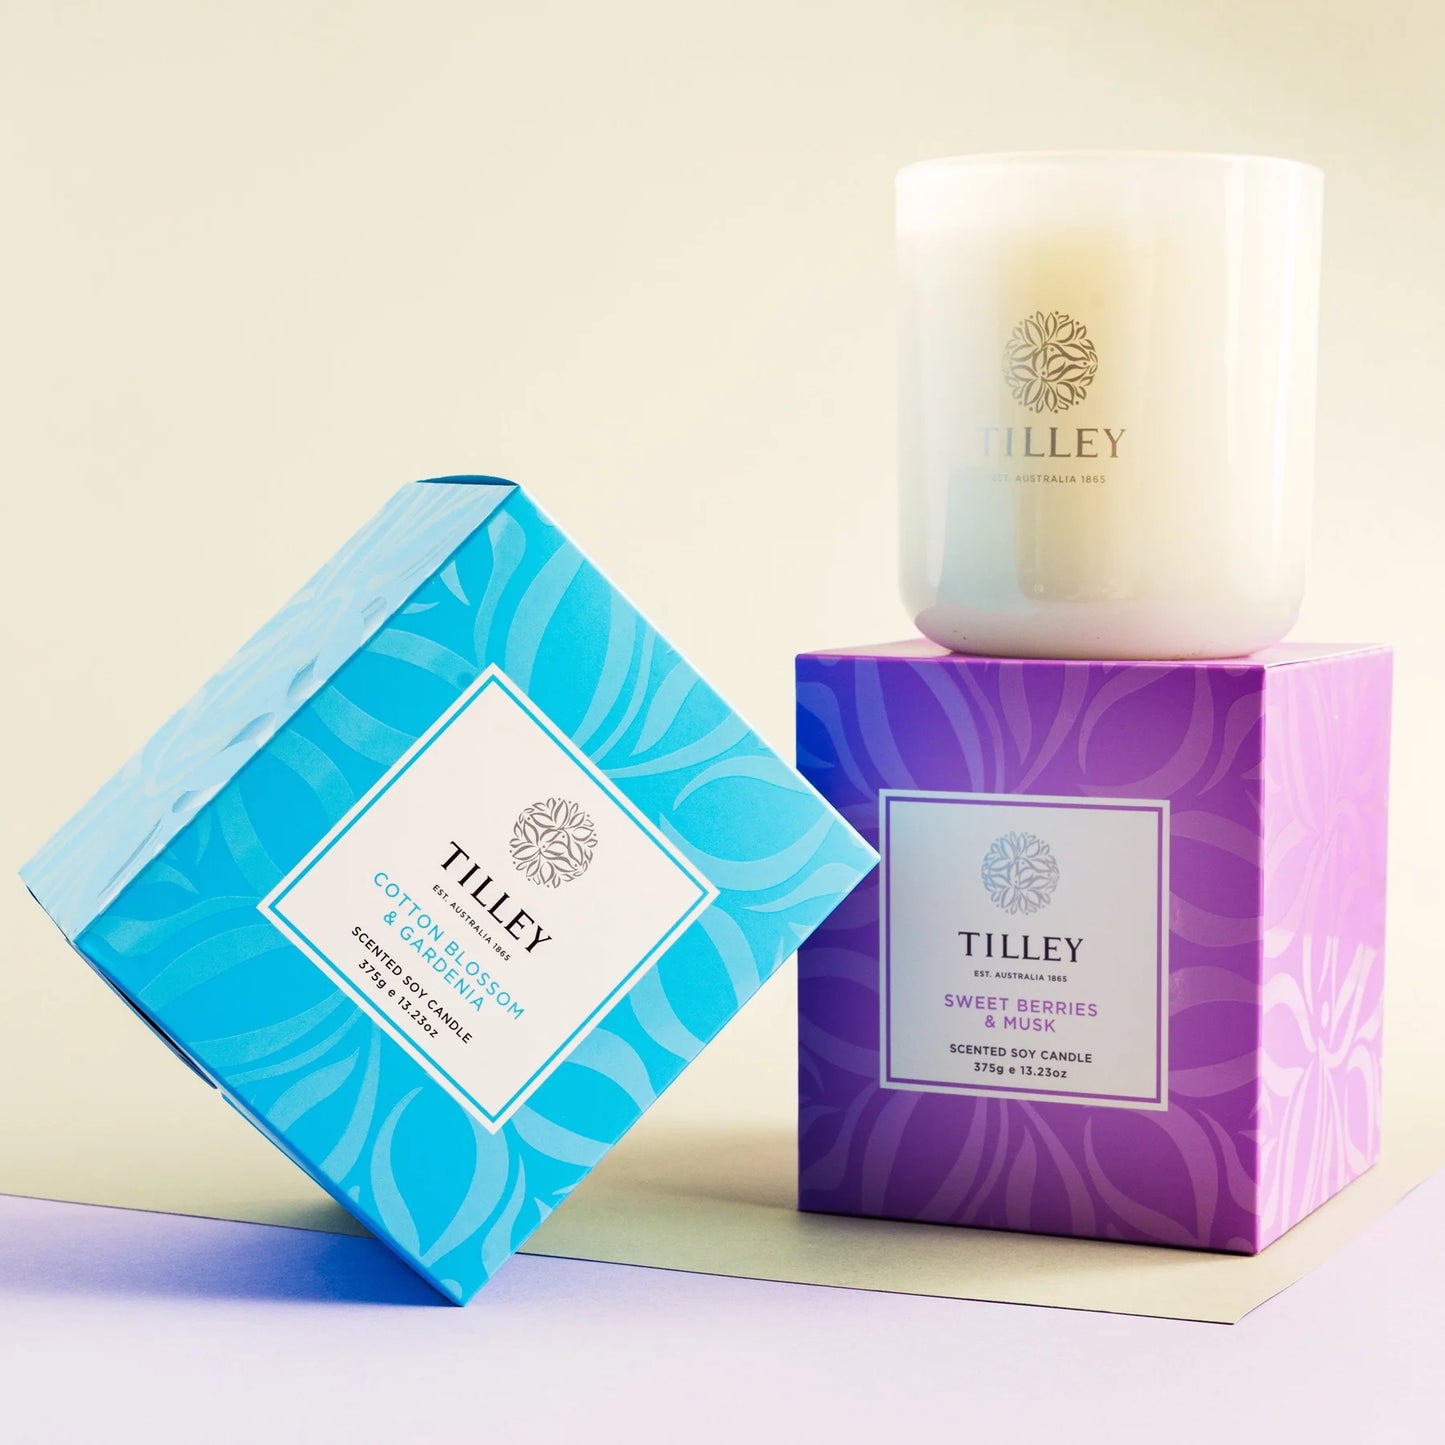 Tilley Scented Soy Candle 375g | Cotton Blossom & Gardenia